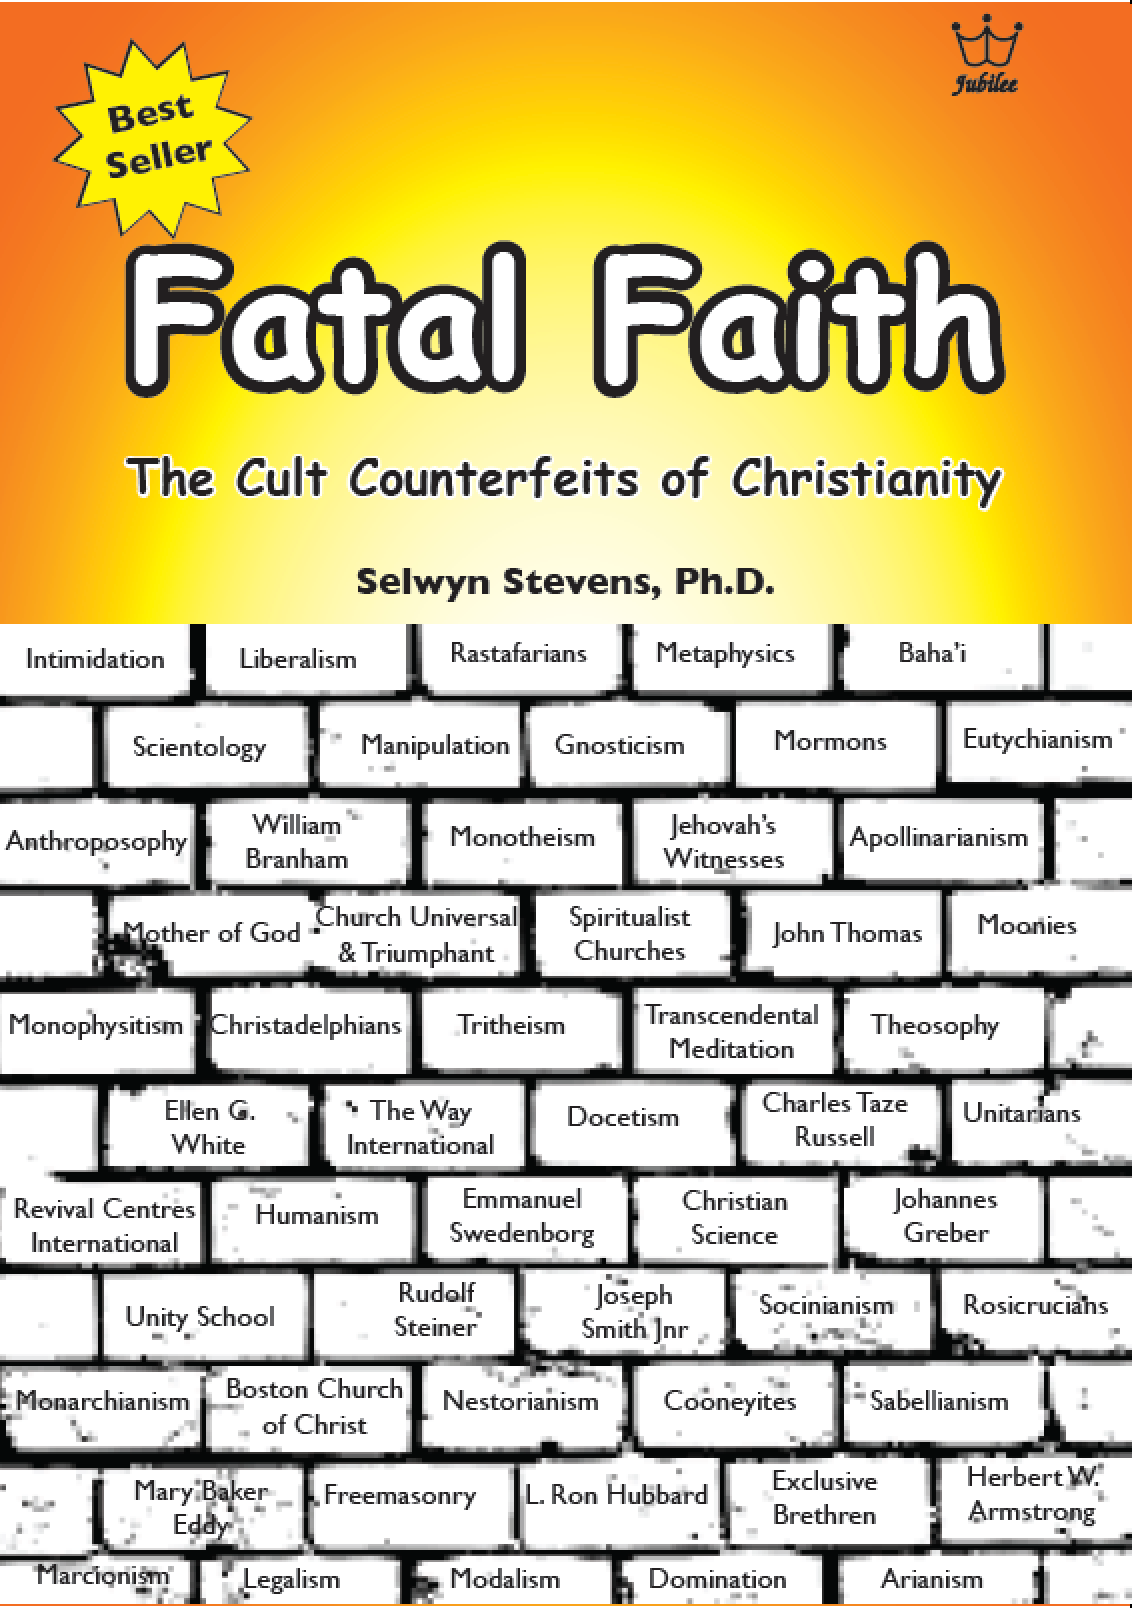 Fatal Faith - the Cult Counterfeits of Christianity  MP4 Video on USB